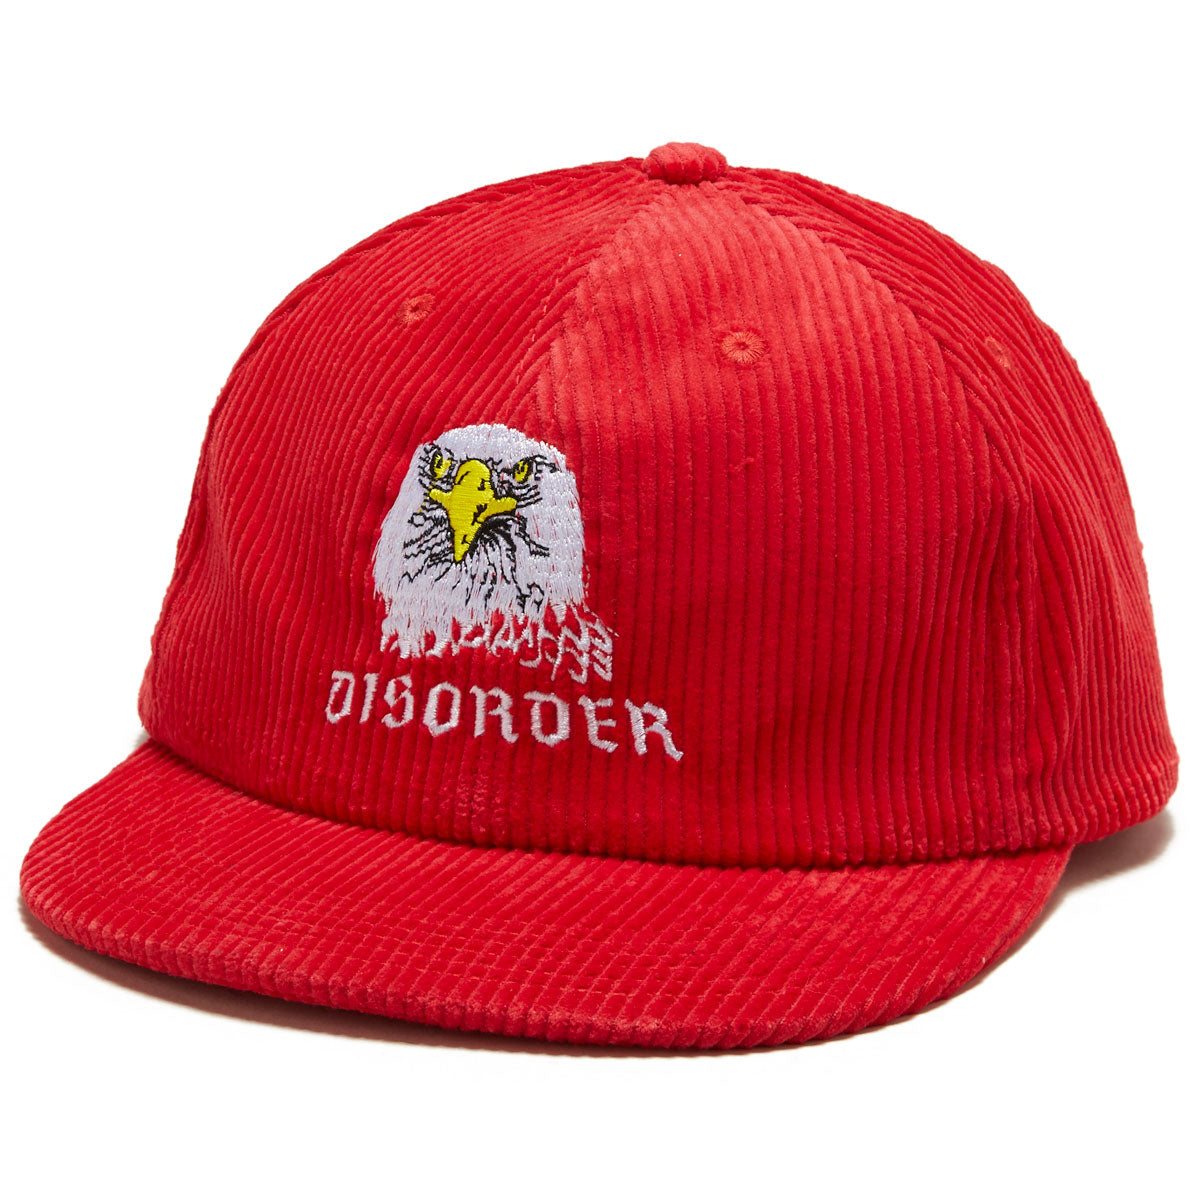 Disorder Eagle Scout Snapback Hat - Red image 1